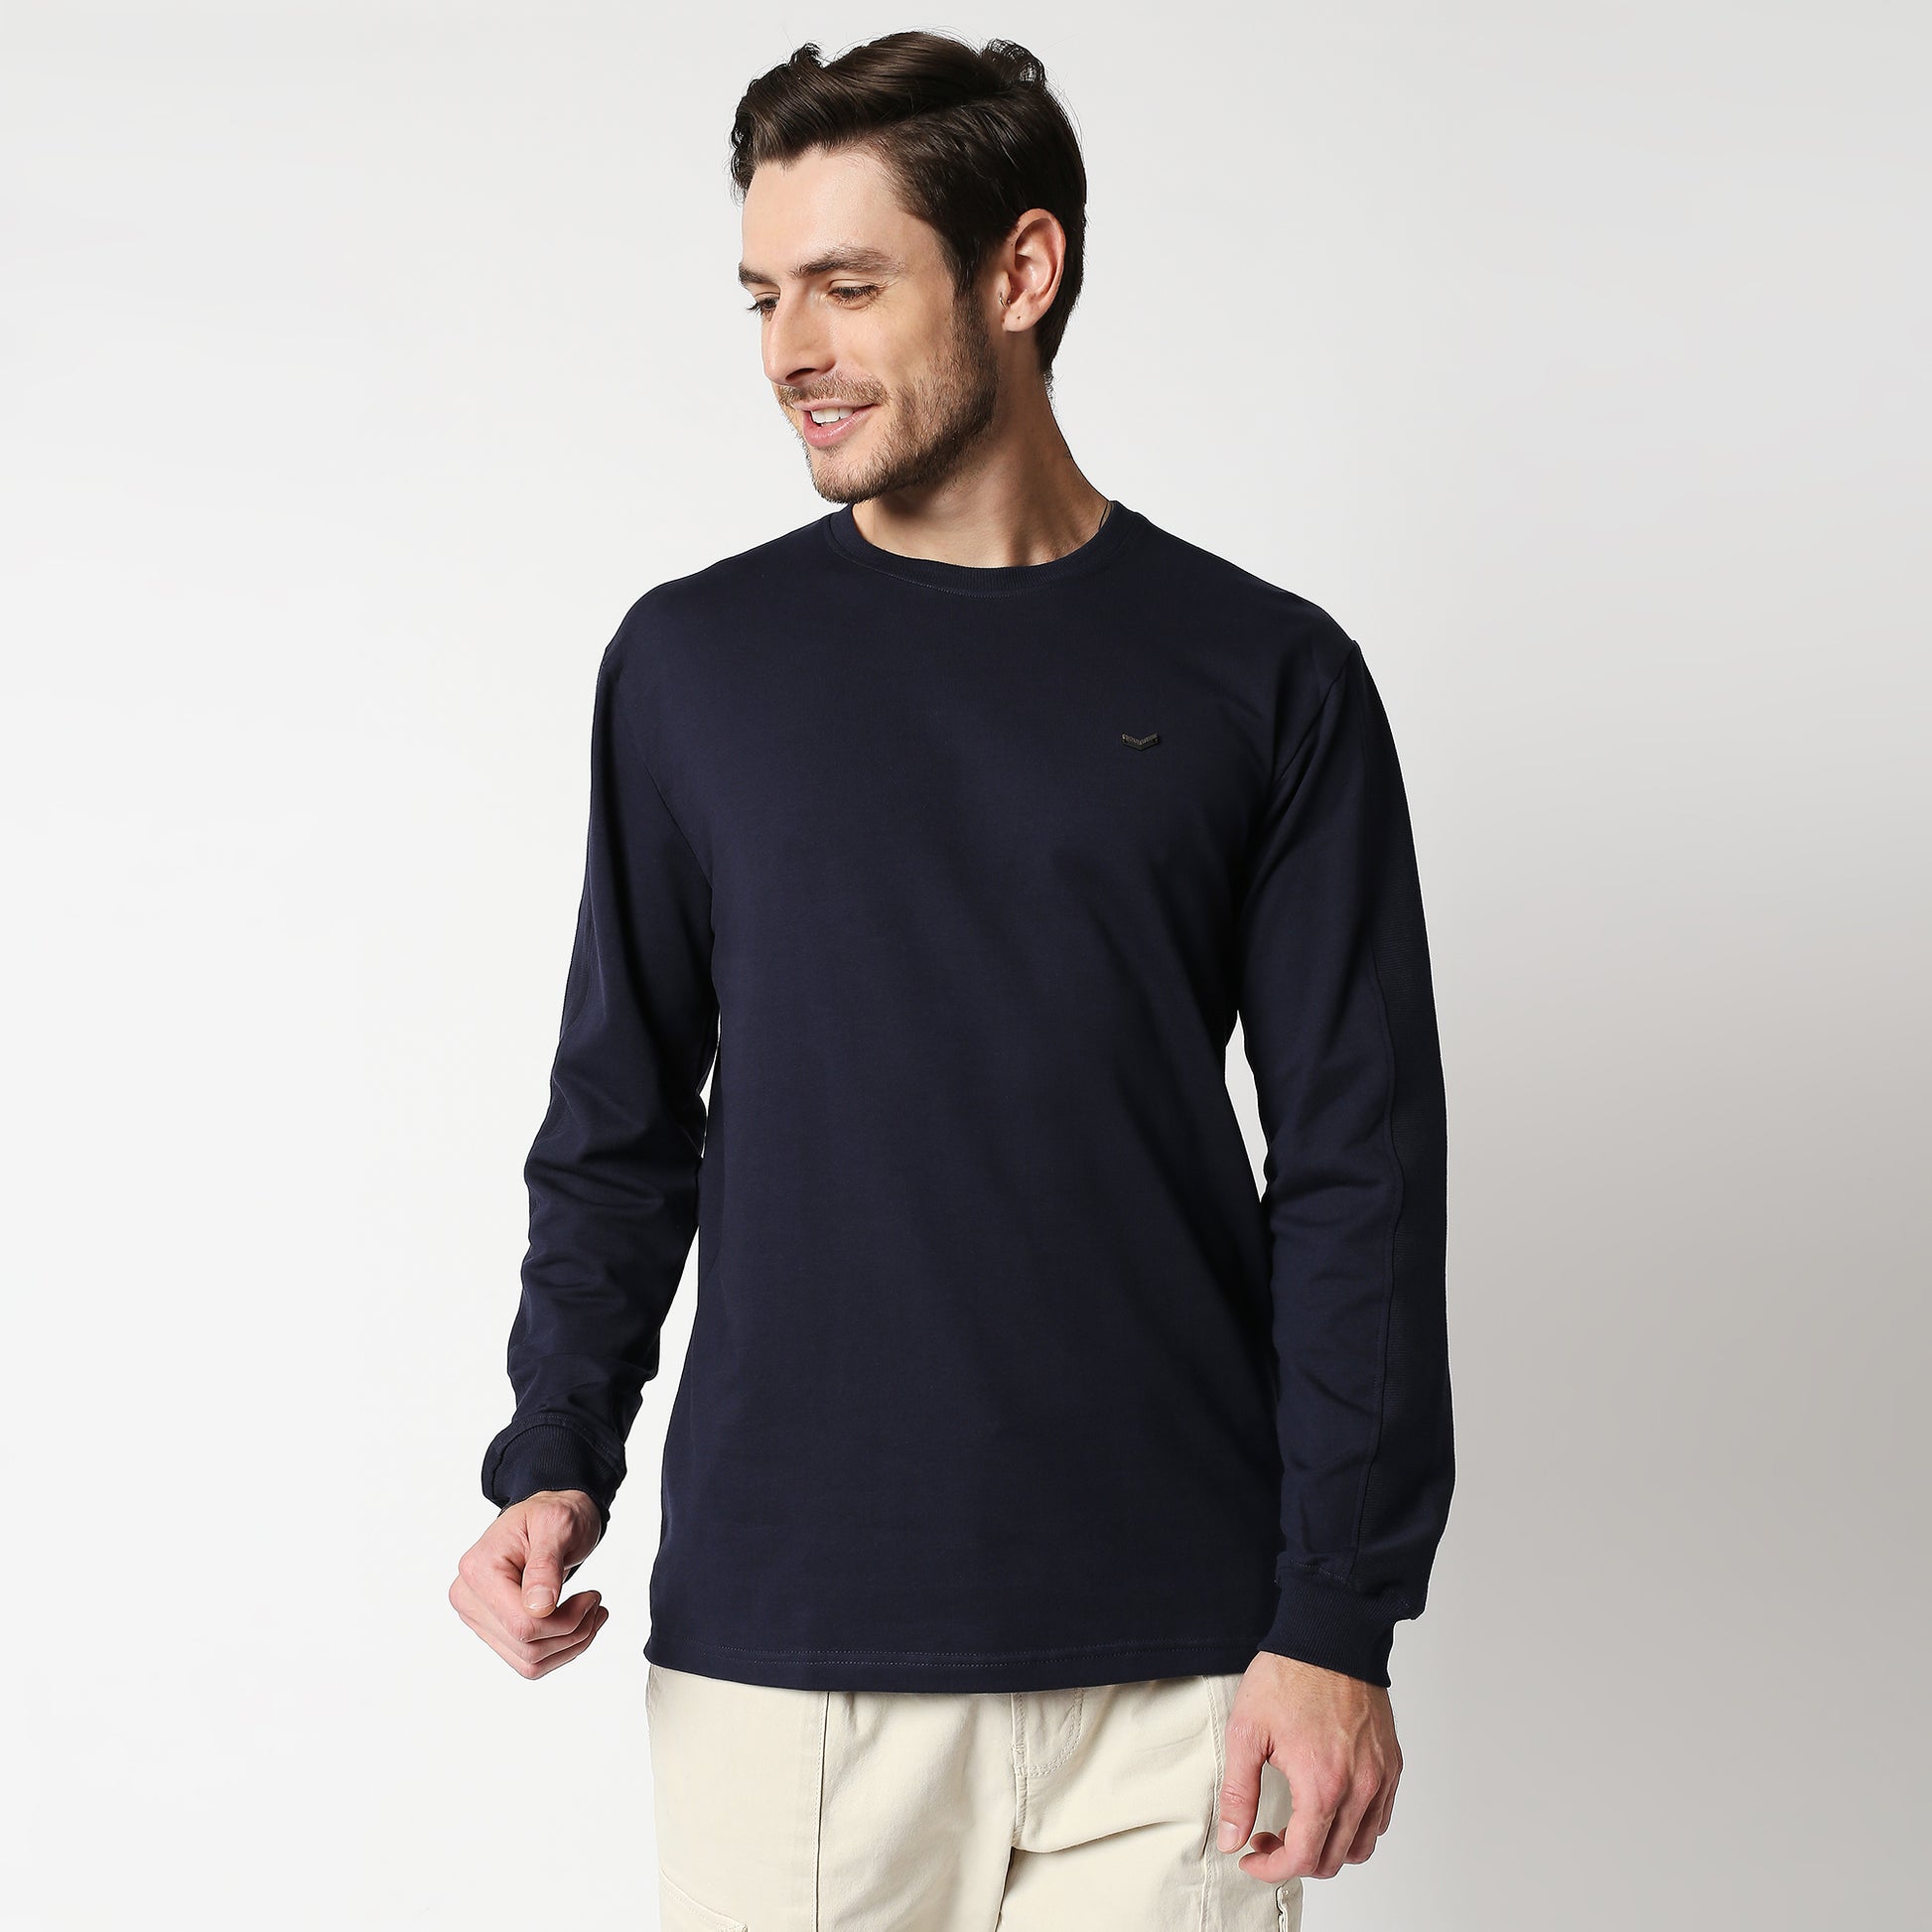 Fostino Navy Blue Pullover Full Sleeves T-Shirt with Rib on Sleeves - Fostino - T-Shirts